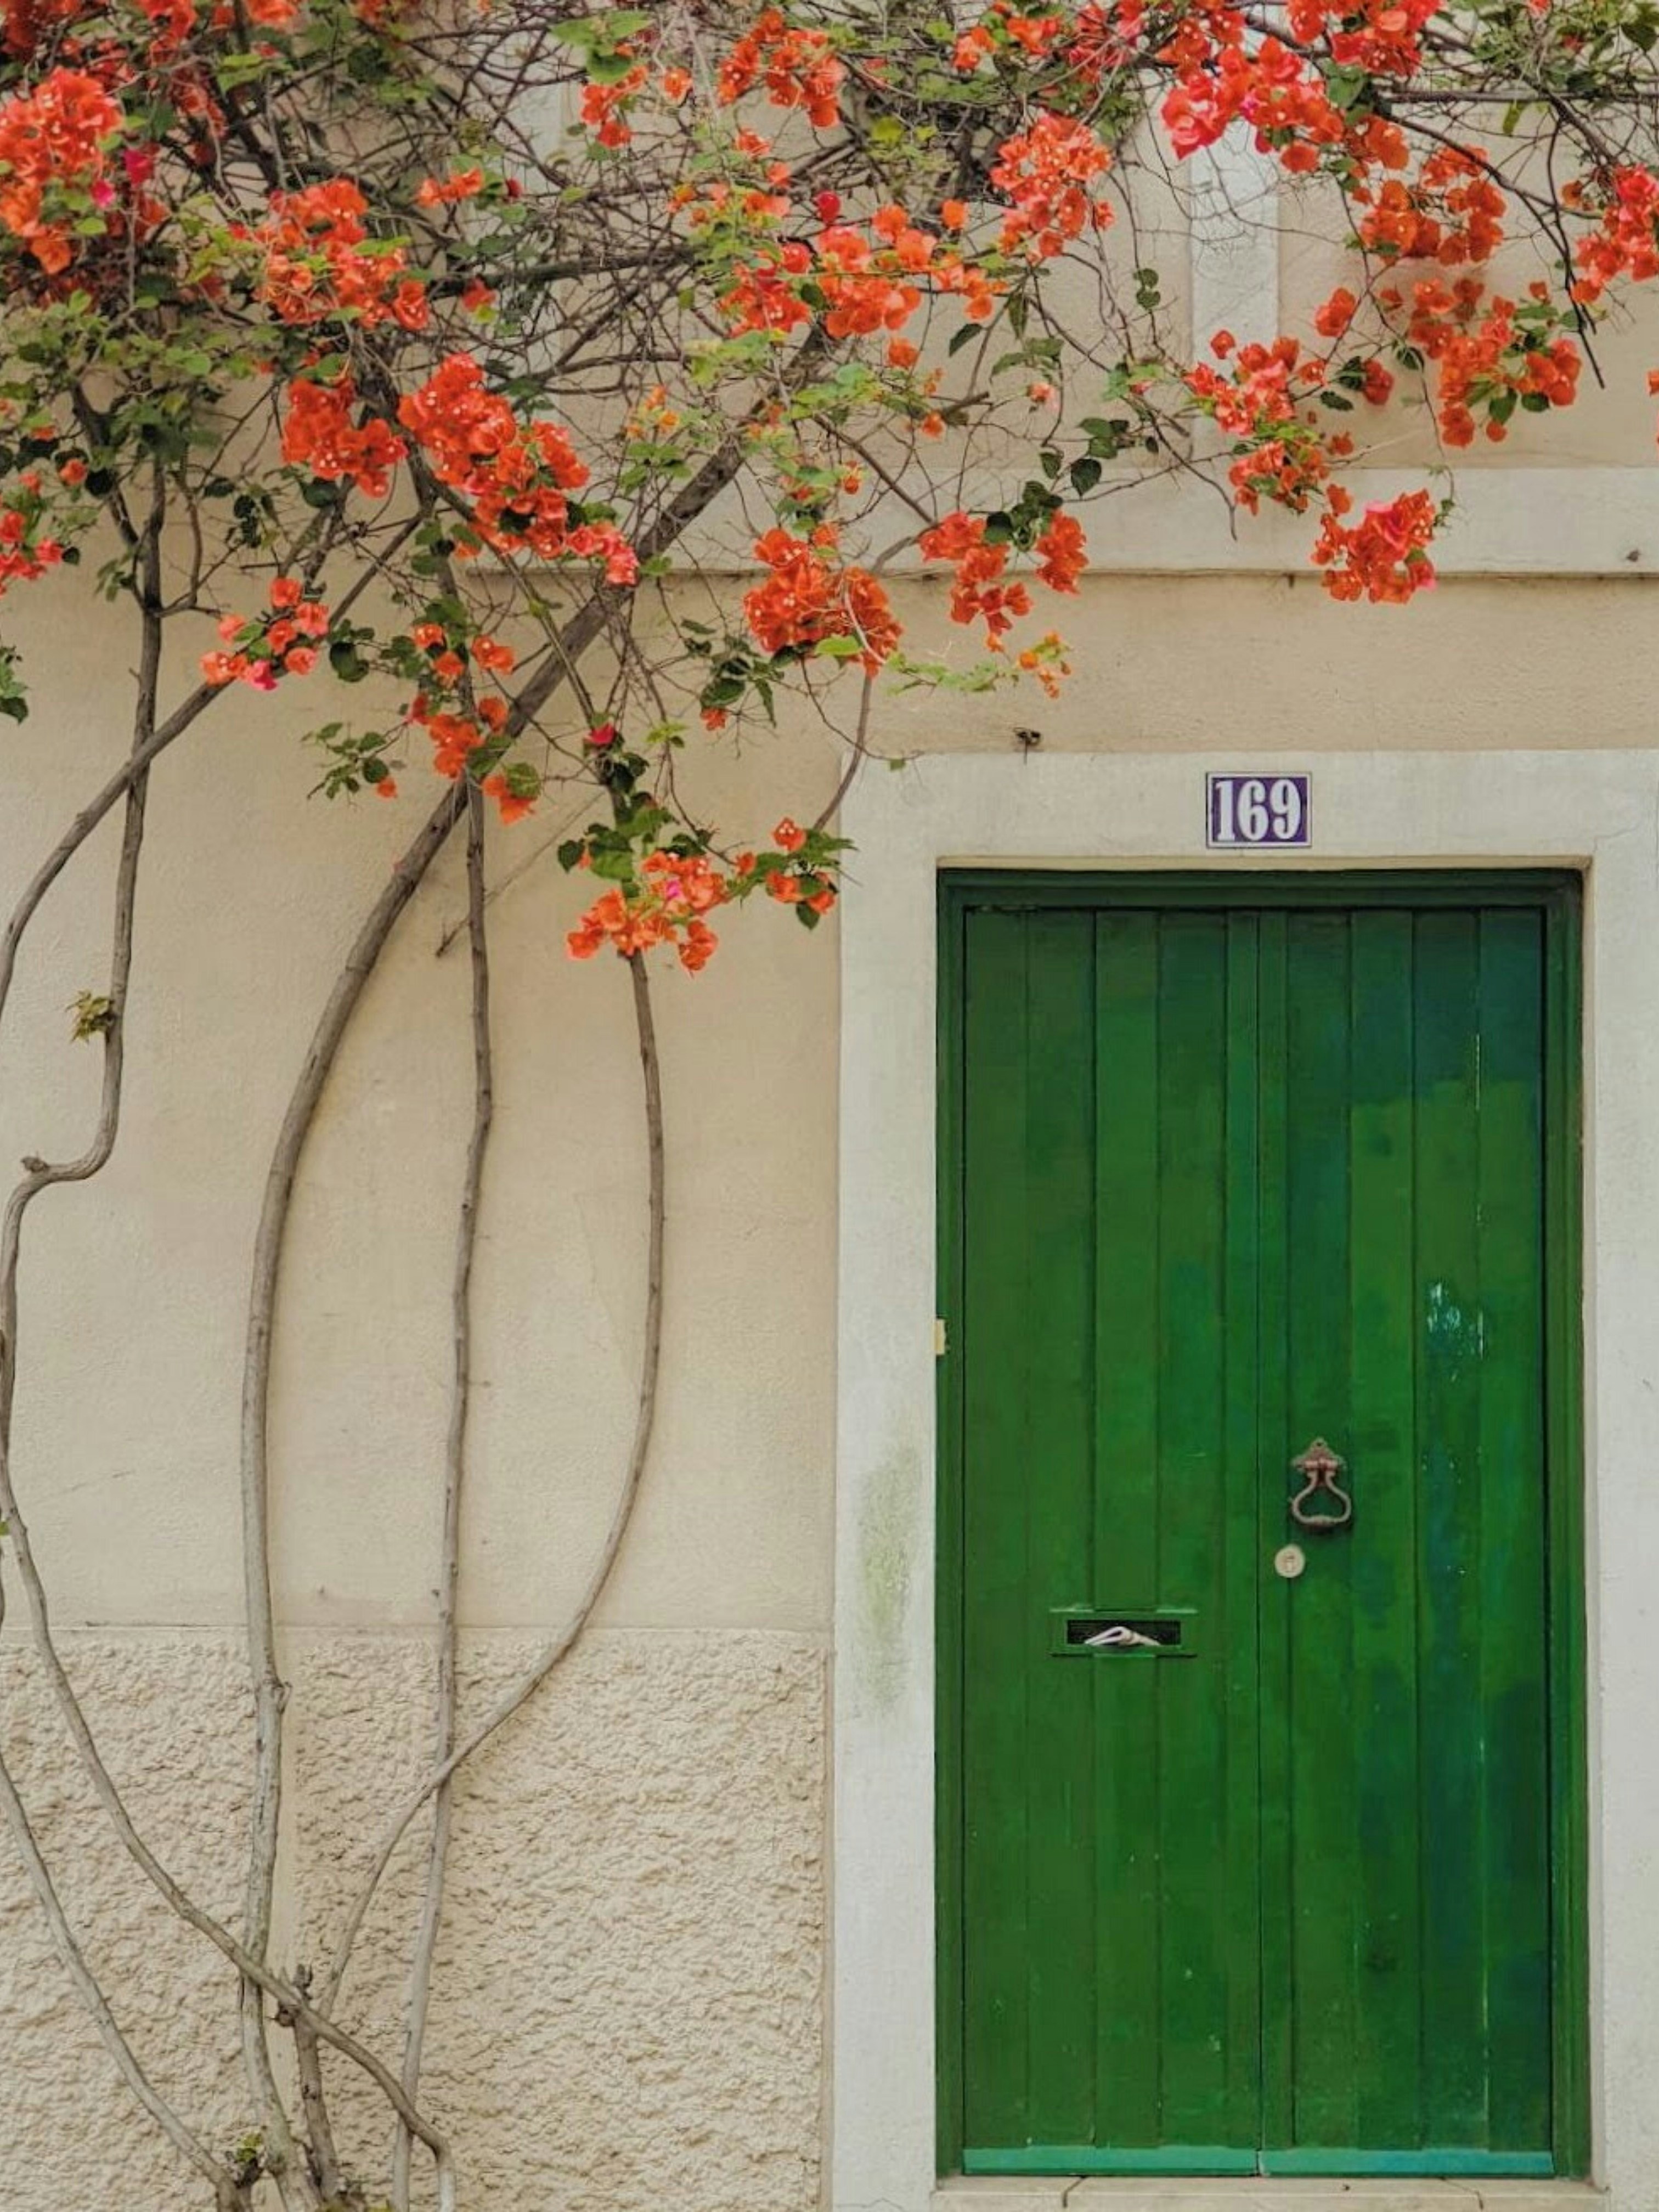 Green door and red flowers in Lisbon, Portugal. For more visual travel inspiration visit our instagram: https://www.instagram.com/reiseuhu/